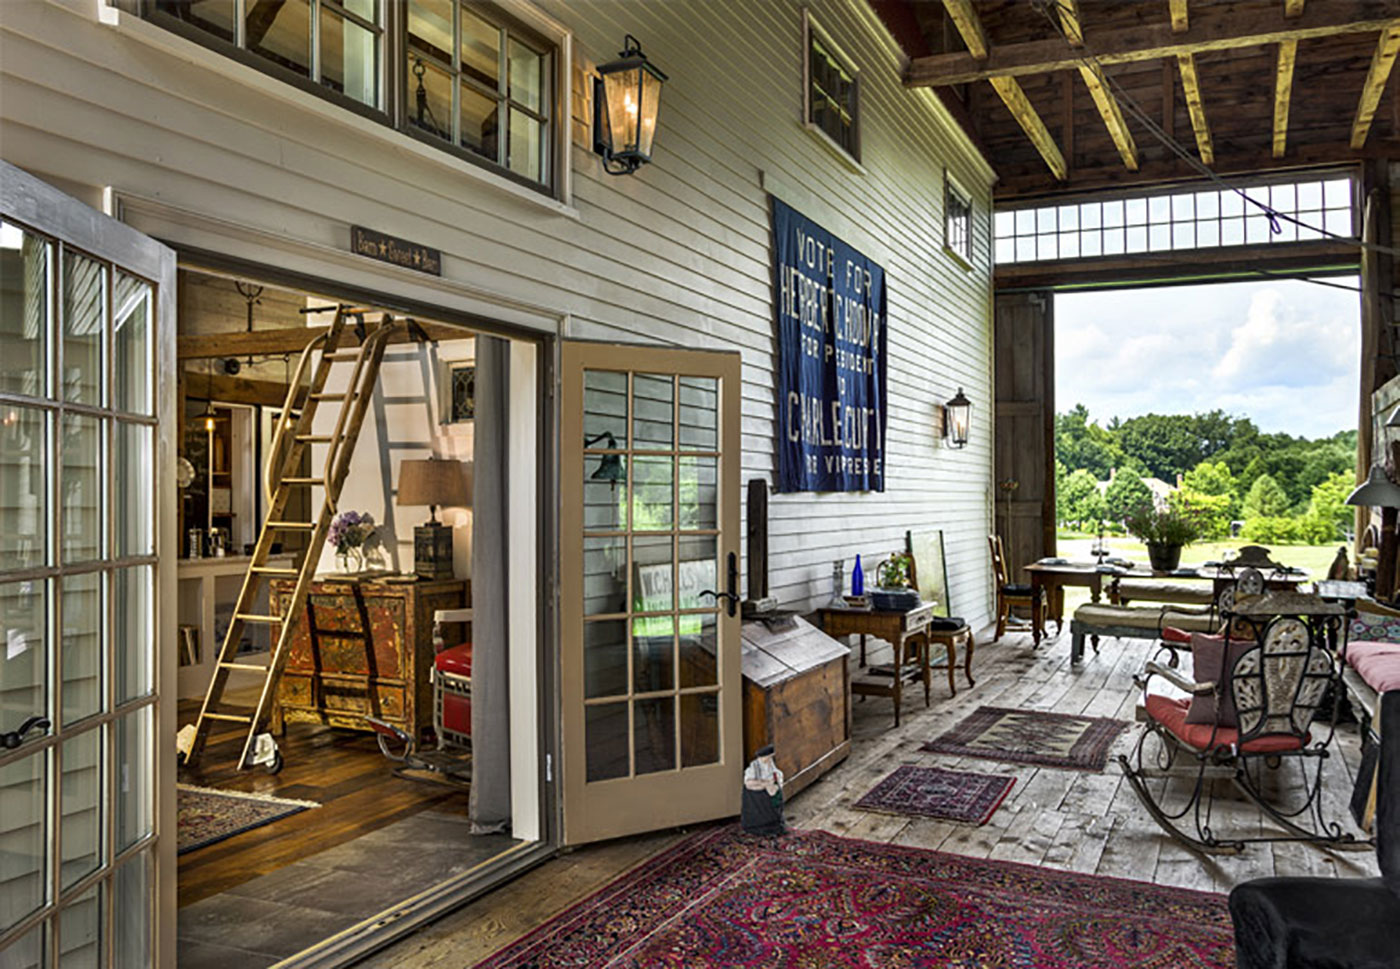 Barn house renovation with vintage decorating